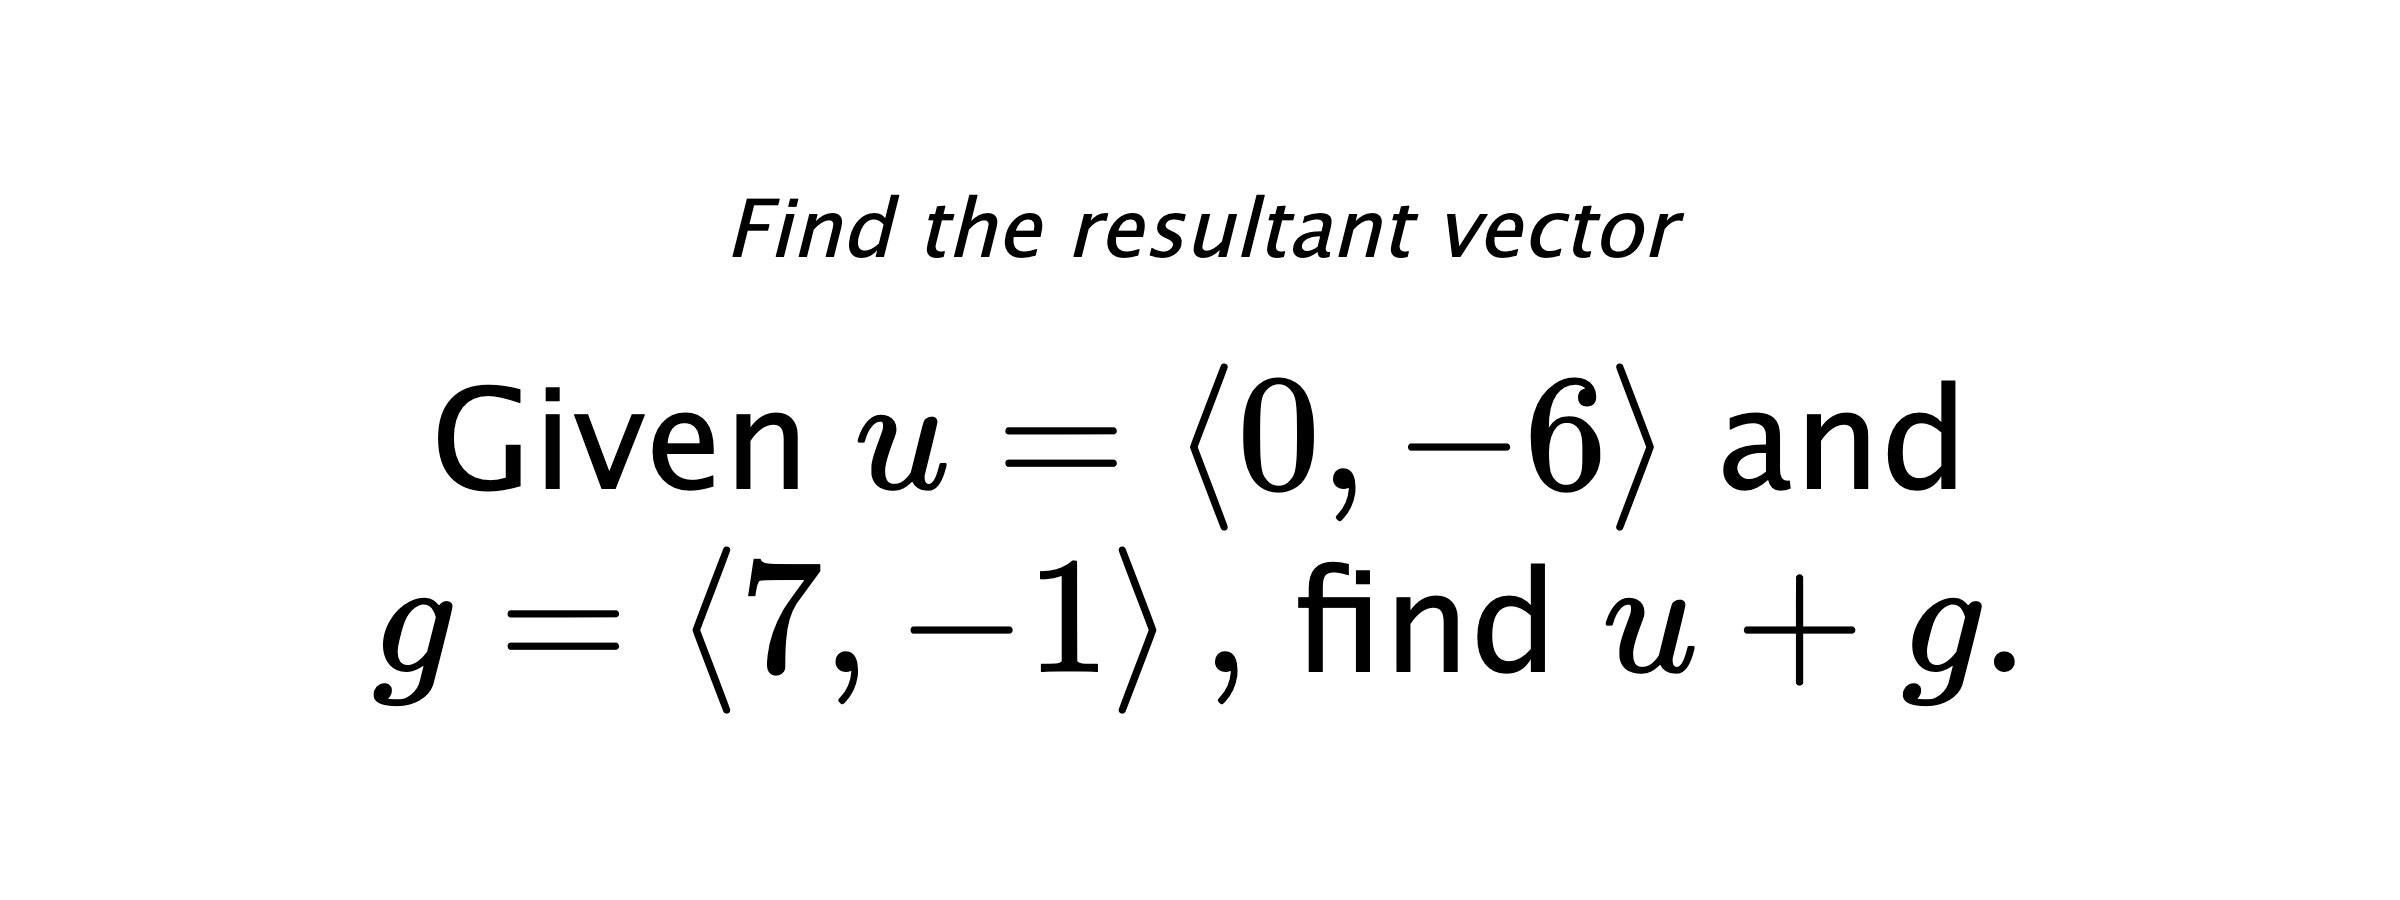 Find the resultant vector Given $ u = \left< 0,-6 \right> $ and $ g = \left< 7,-1 \right> ,$ find $ u+g .$